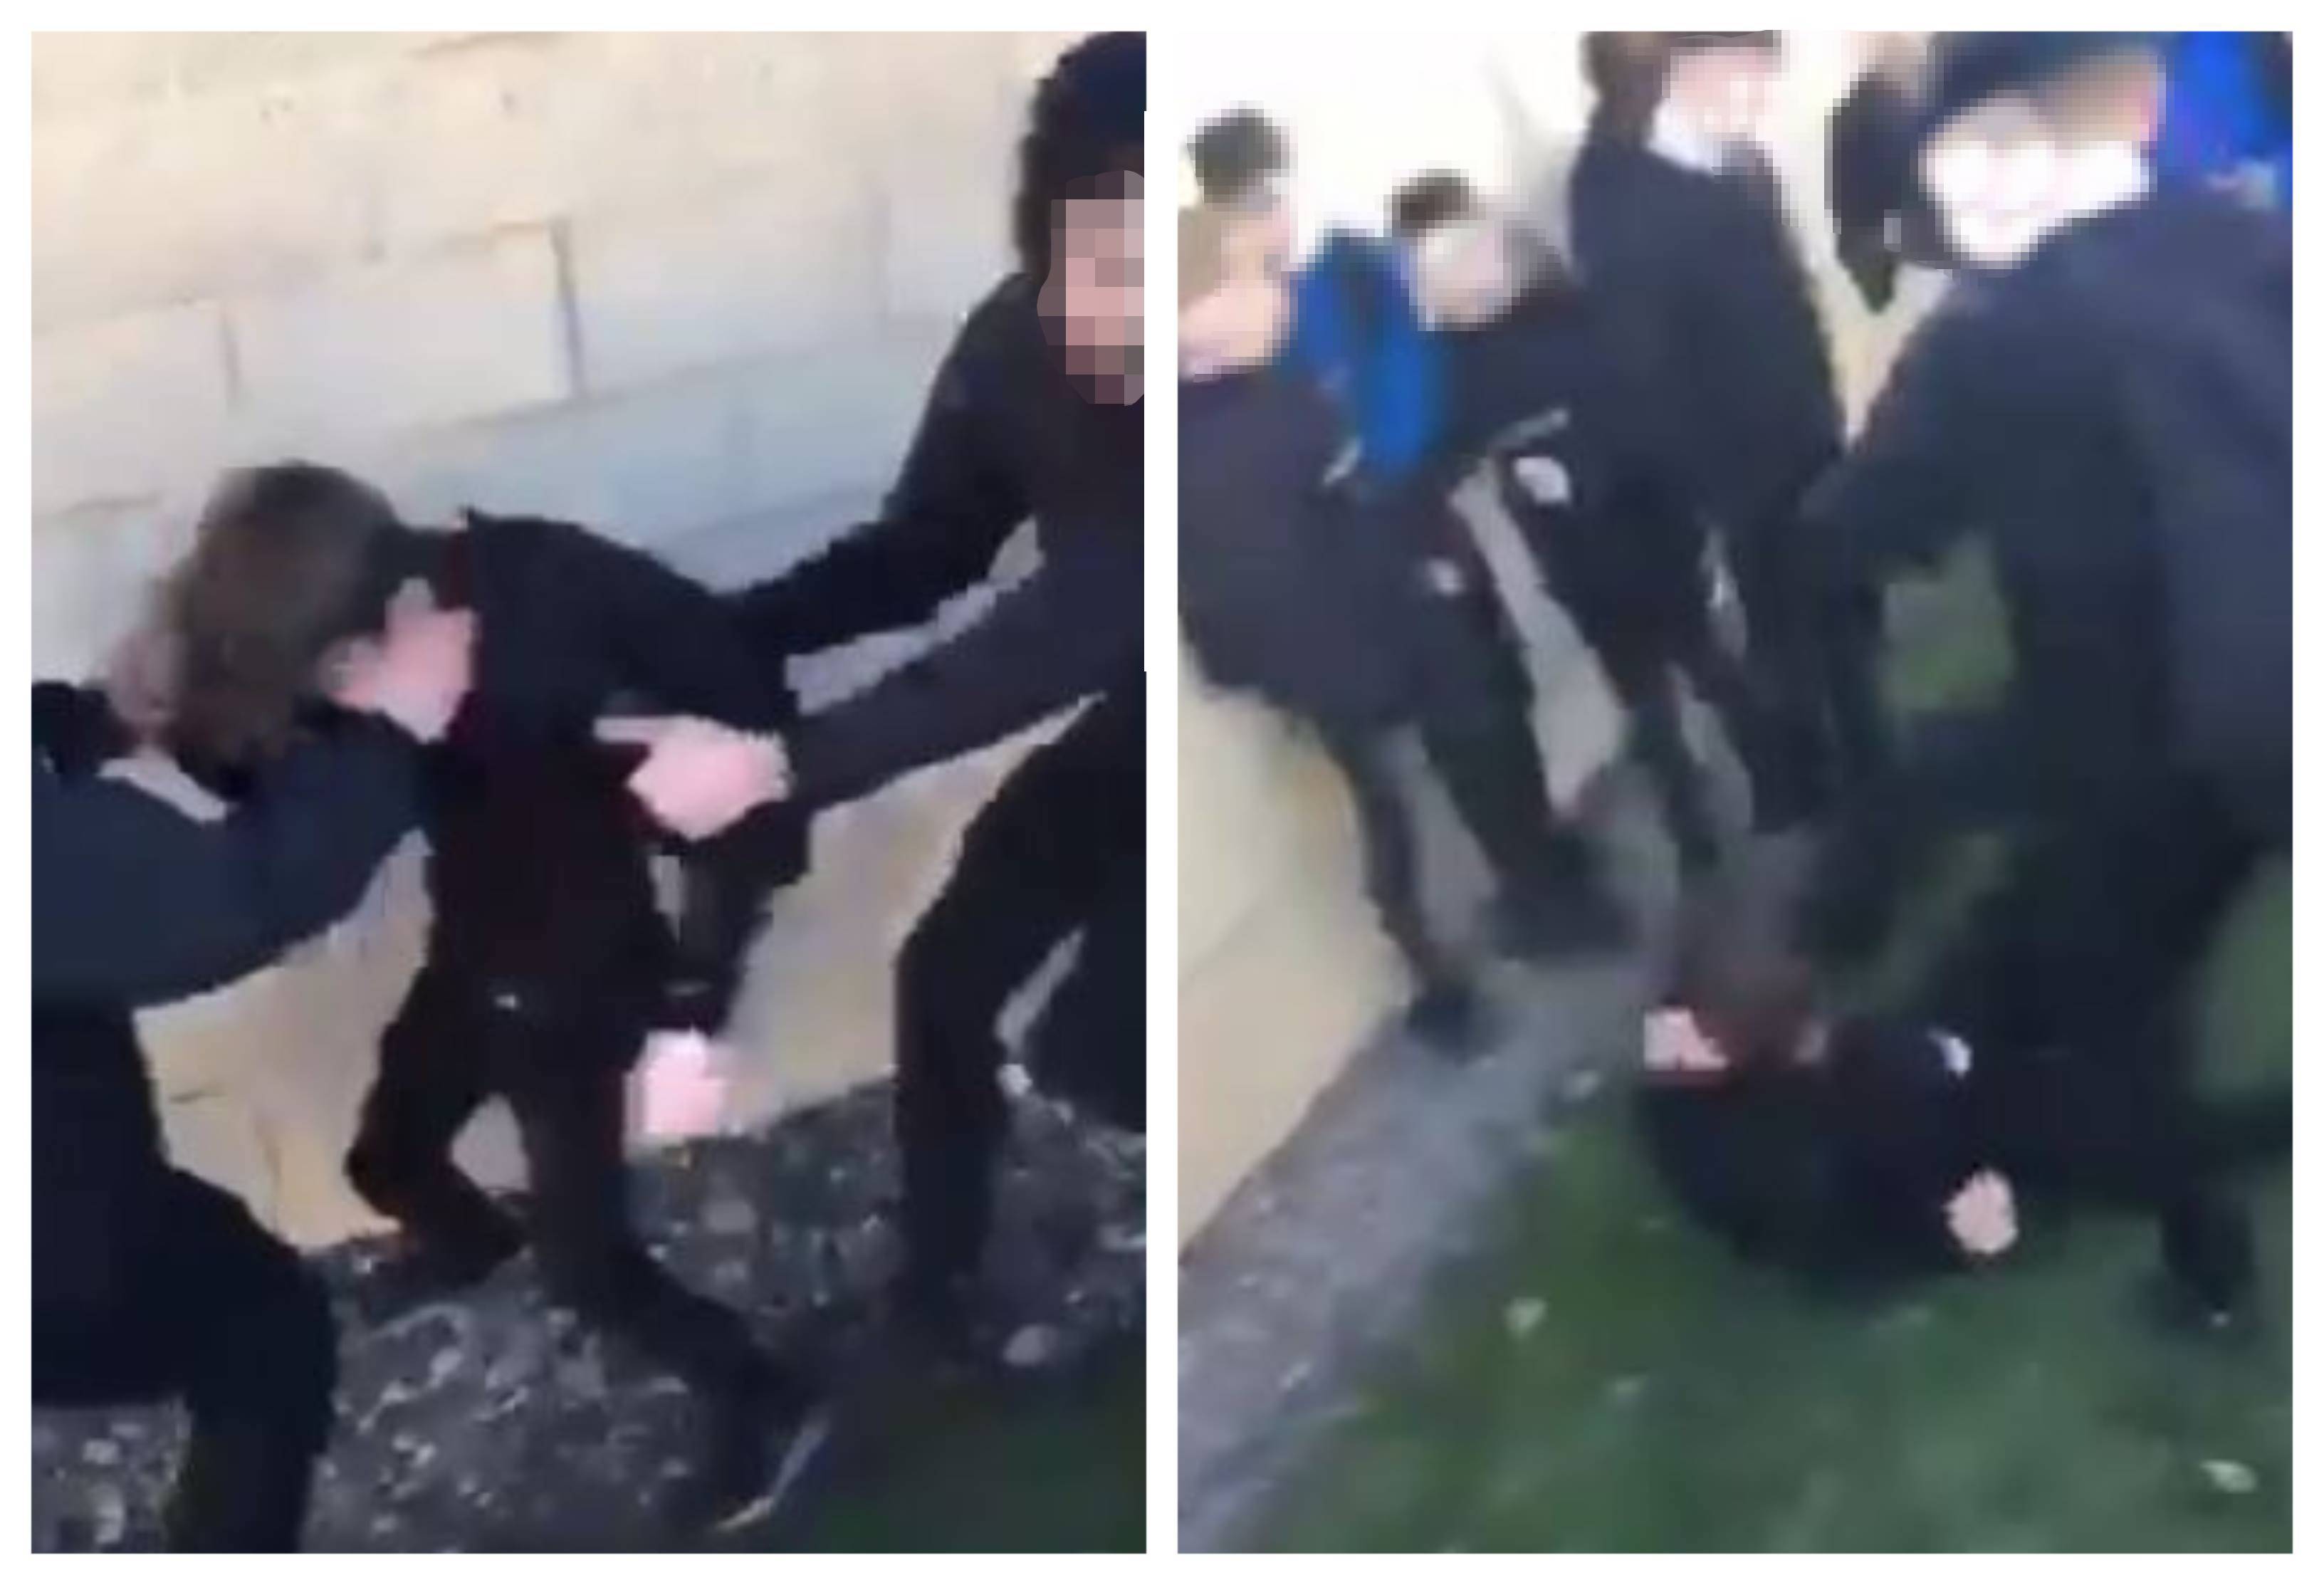 Left: The boy is wrestled to the ground. Right: A pupil kicks the boy in the face as he is defenceless on the ground.